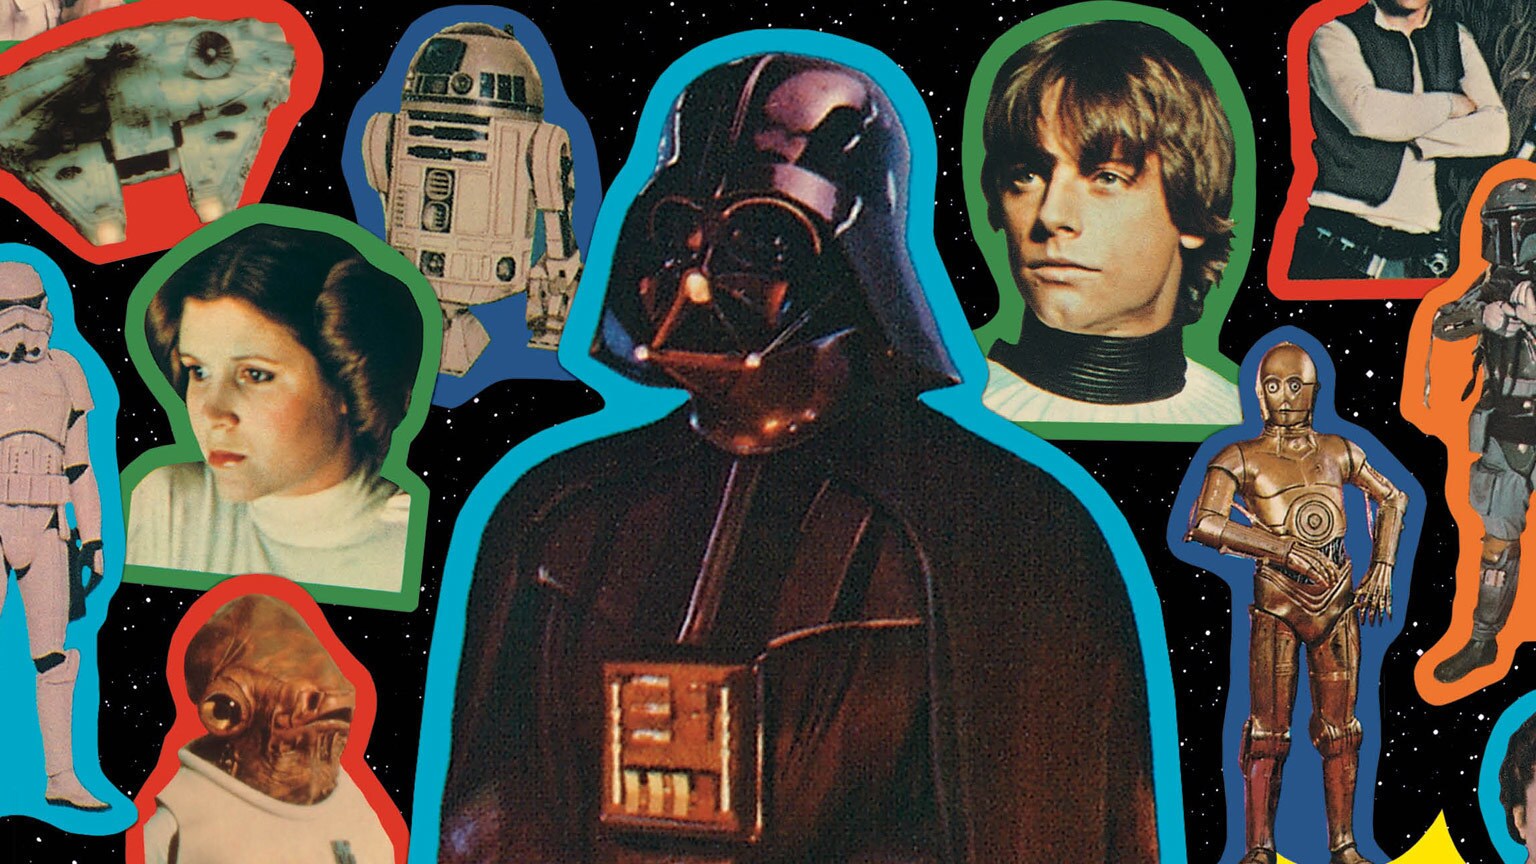 Stickers Strike Back in The Star Wars Topps Classic Sticker Book - First Look!